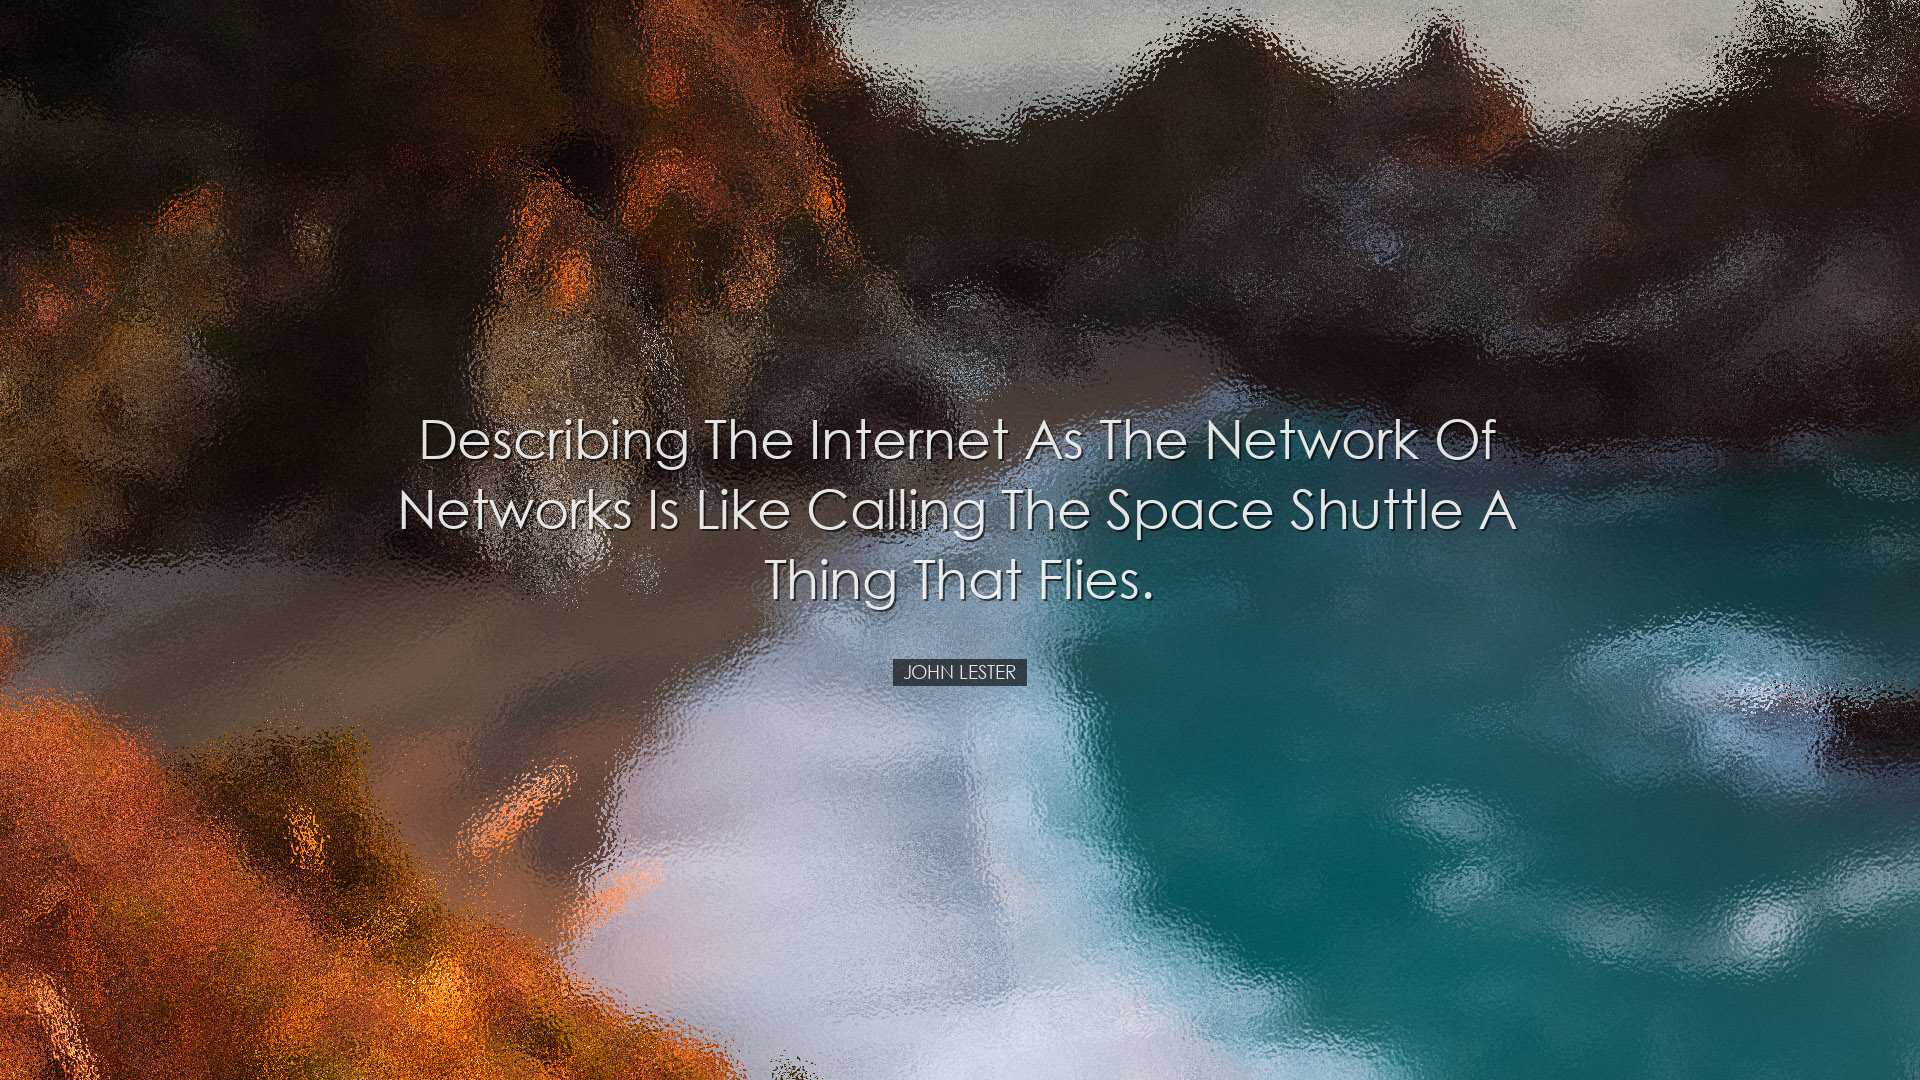 Describing the Internet as the Network of Networks is like calling